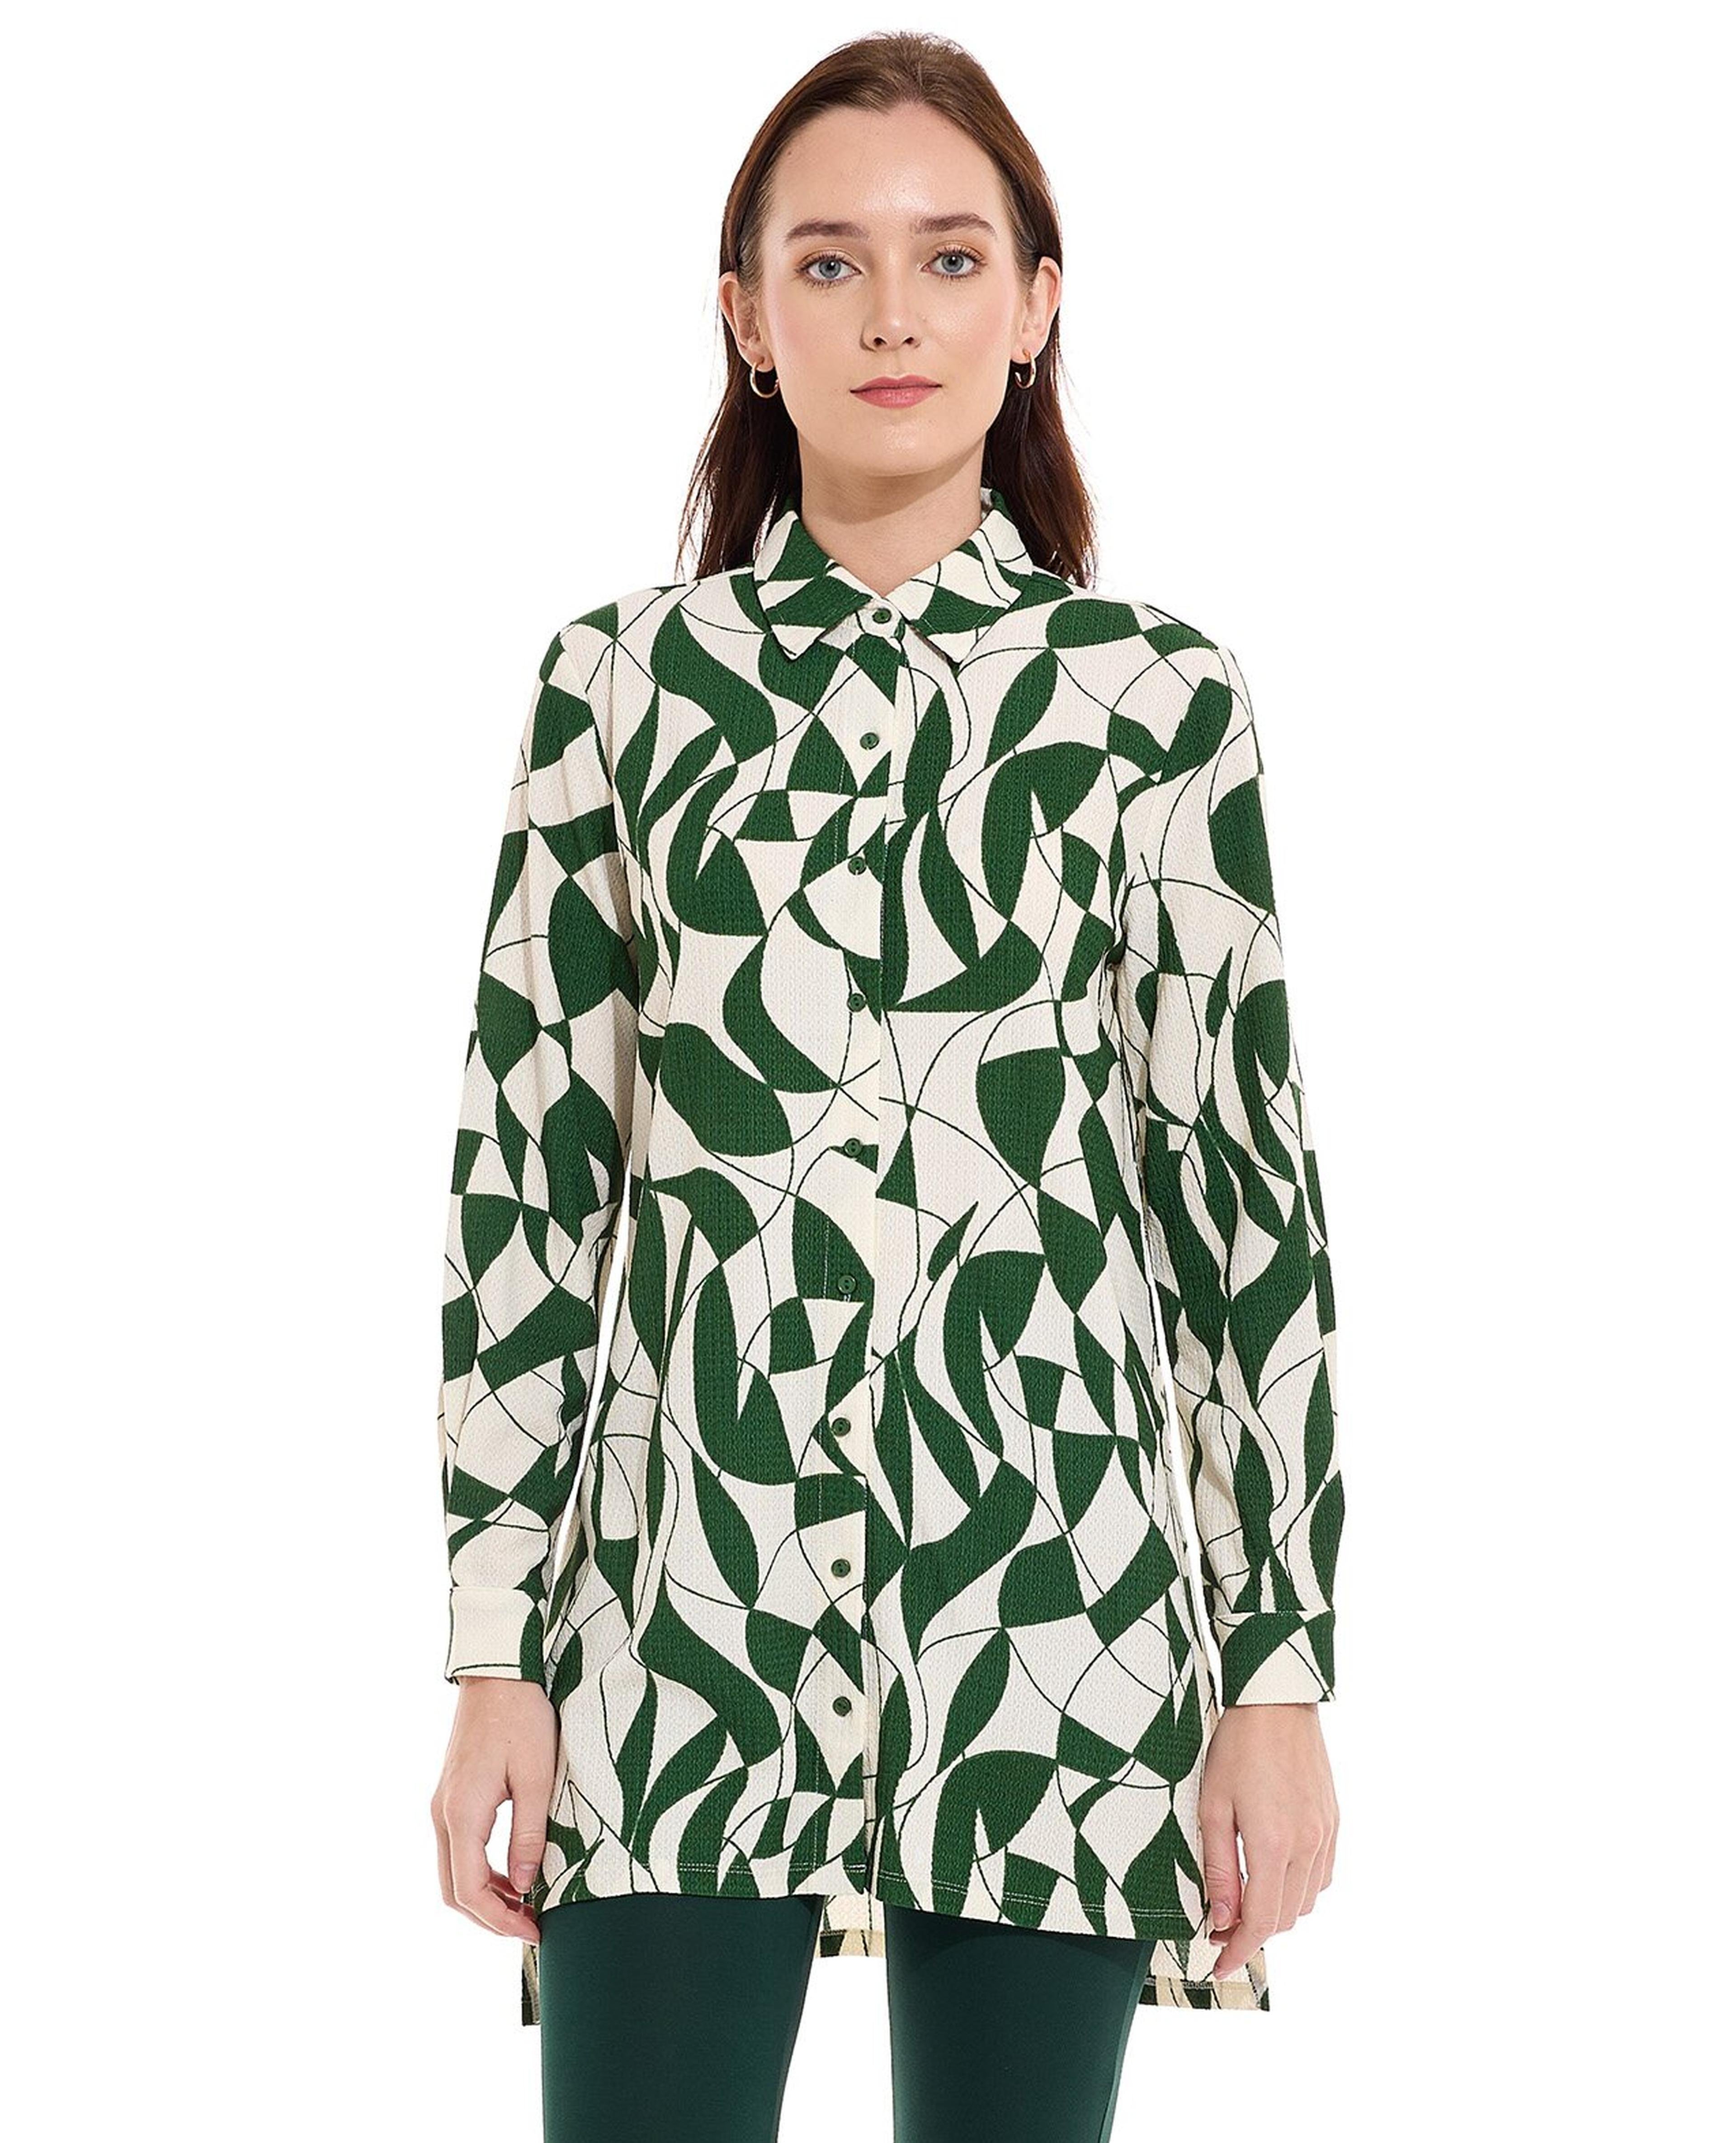 Patterned Shirt Tunic with Long Sleeves